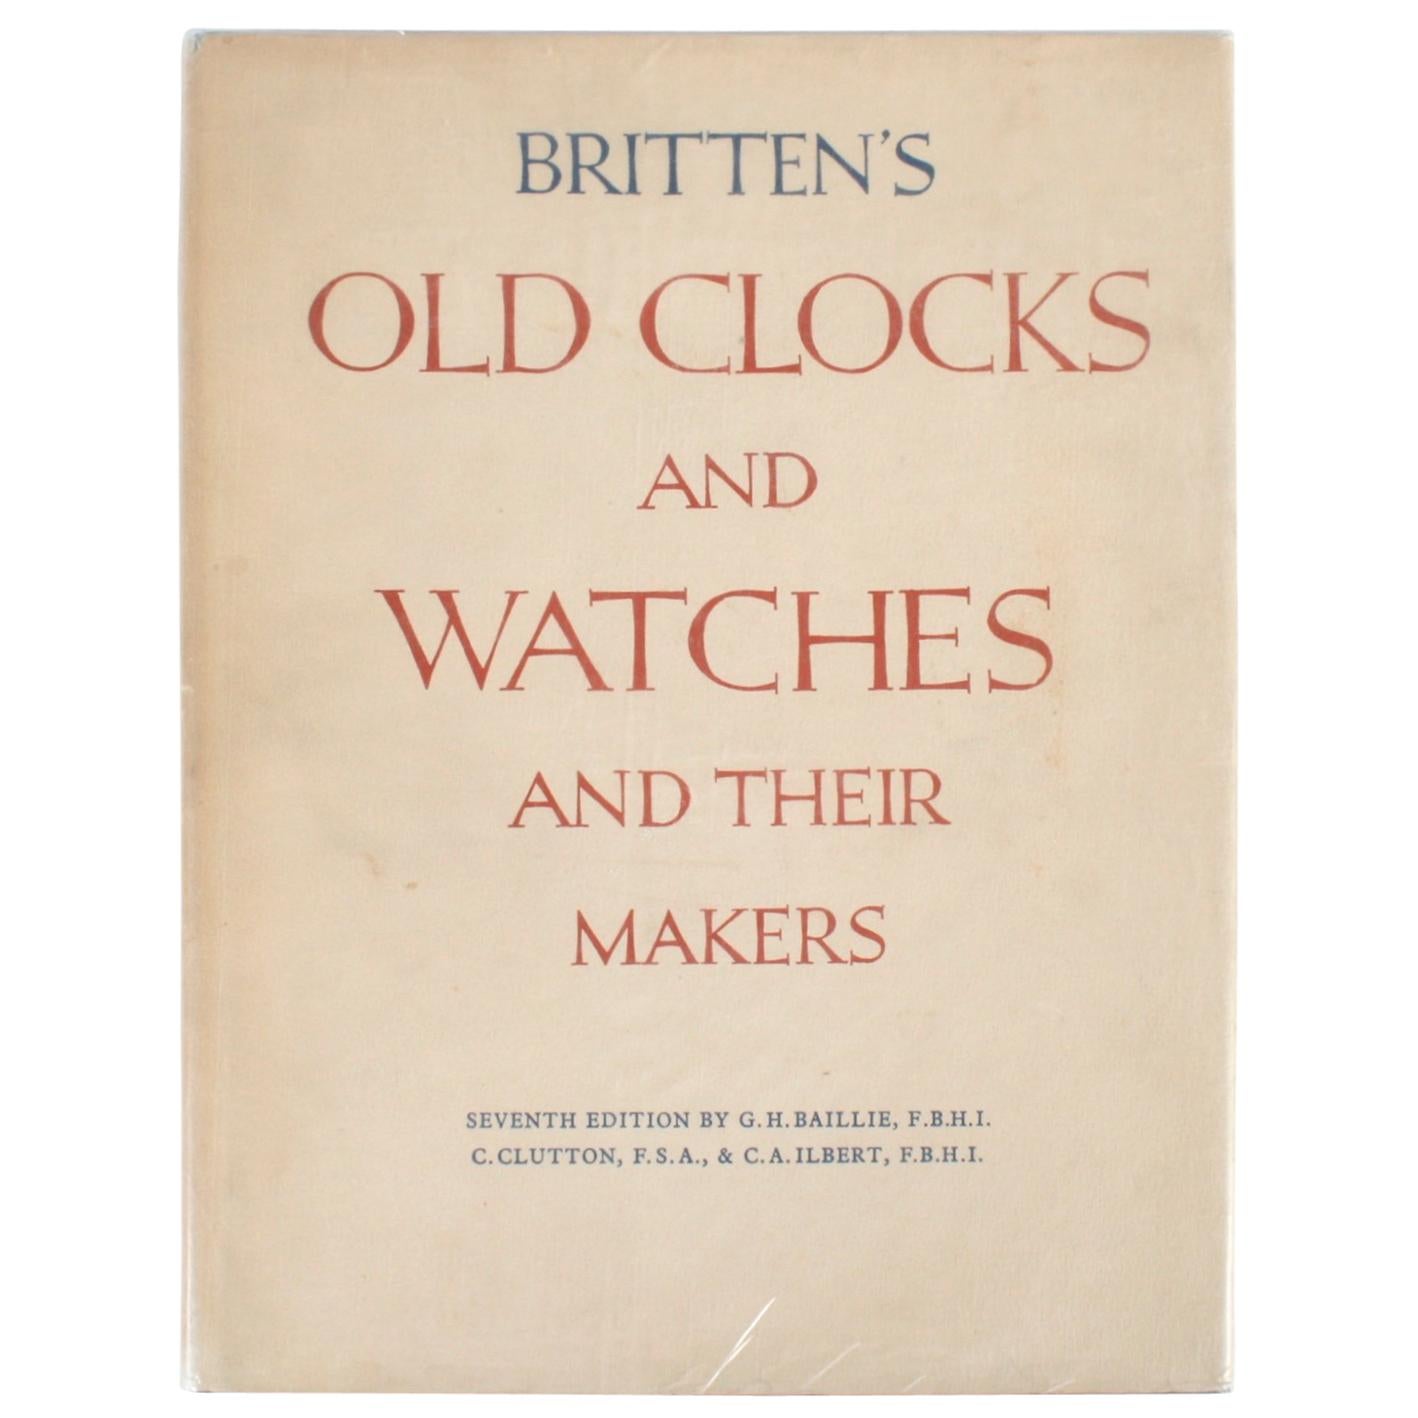 Britten's Old Clocks and Watches and Their Makers by Granville Hugh Baillie